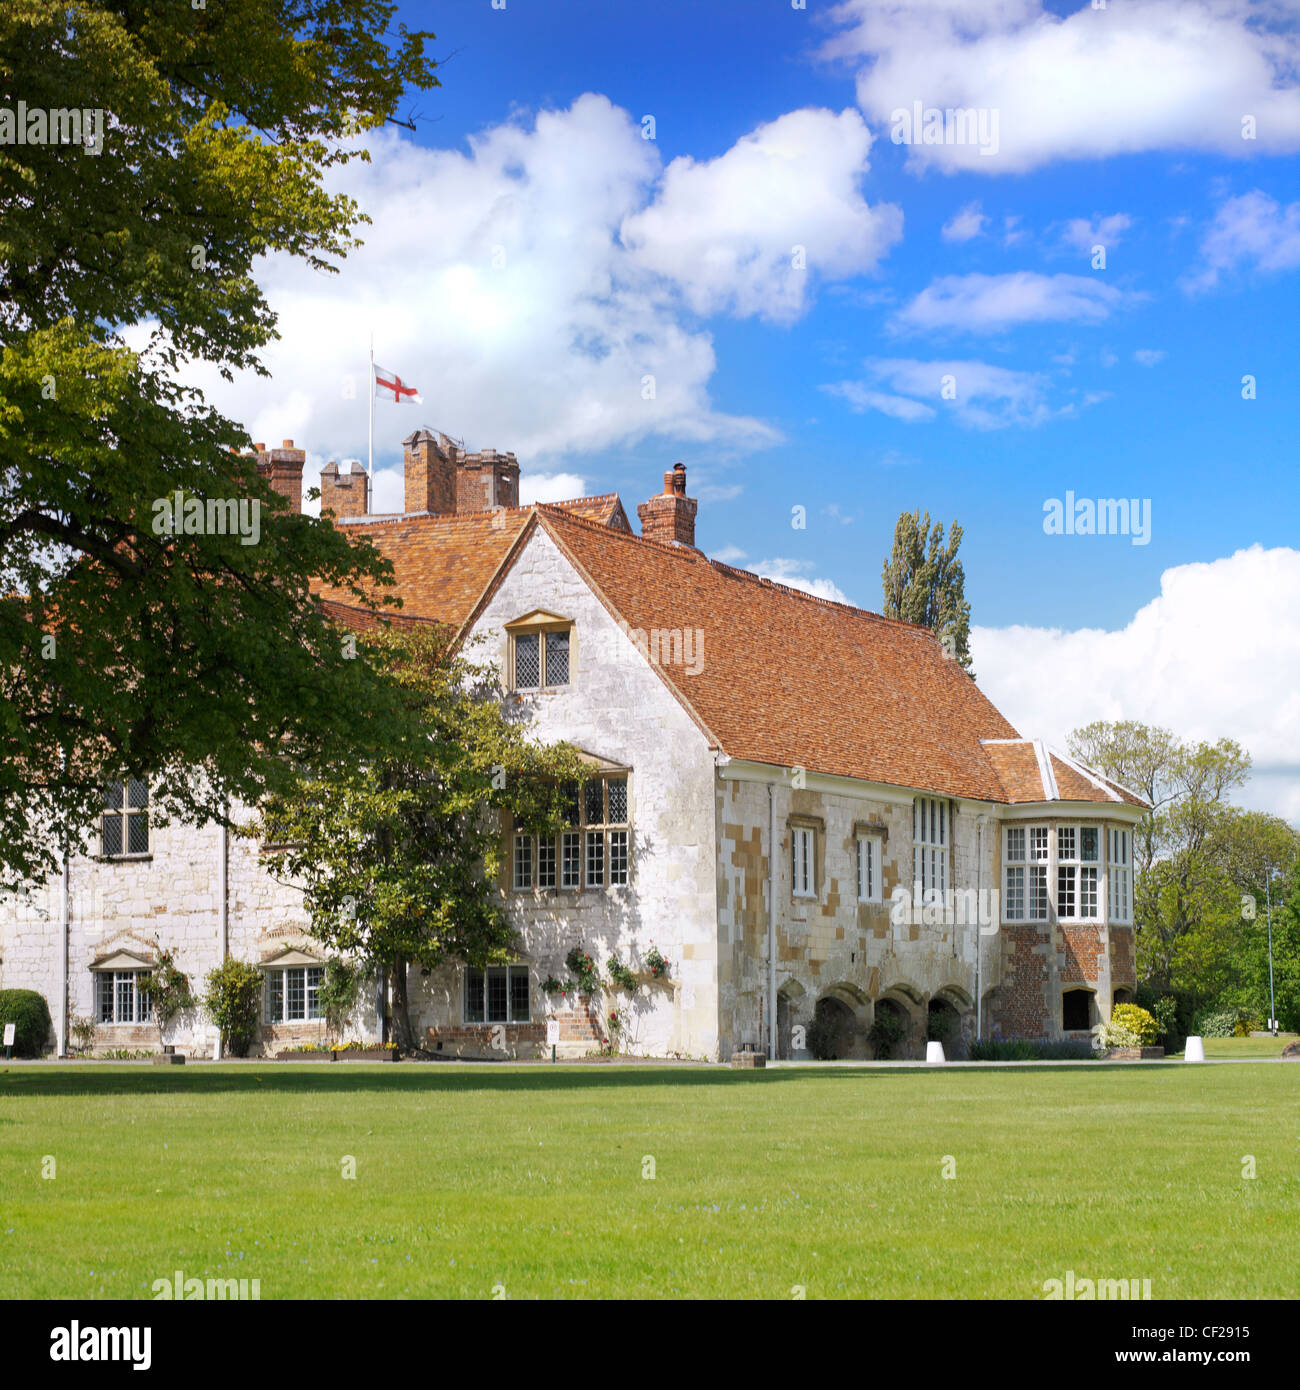 Bisham Abbey. This manor house was built around 1260 as a community house for the Knights Templar. Stock Photo